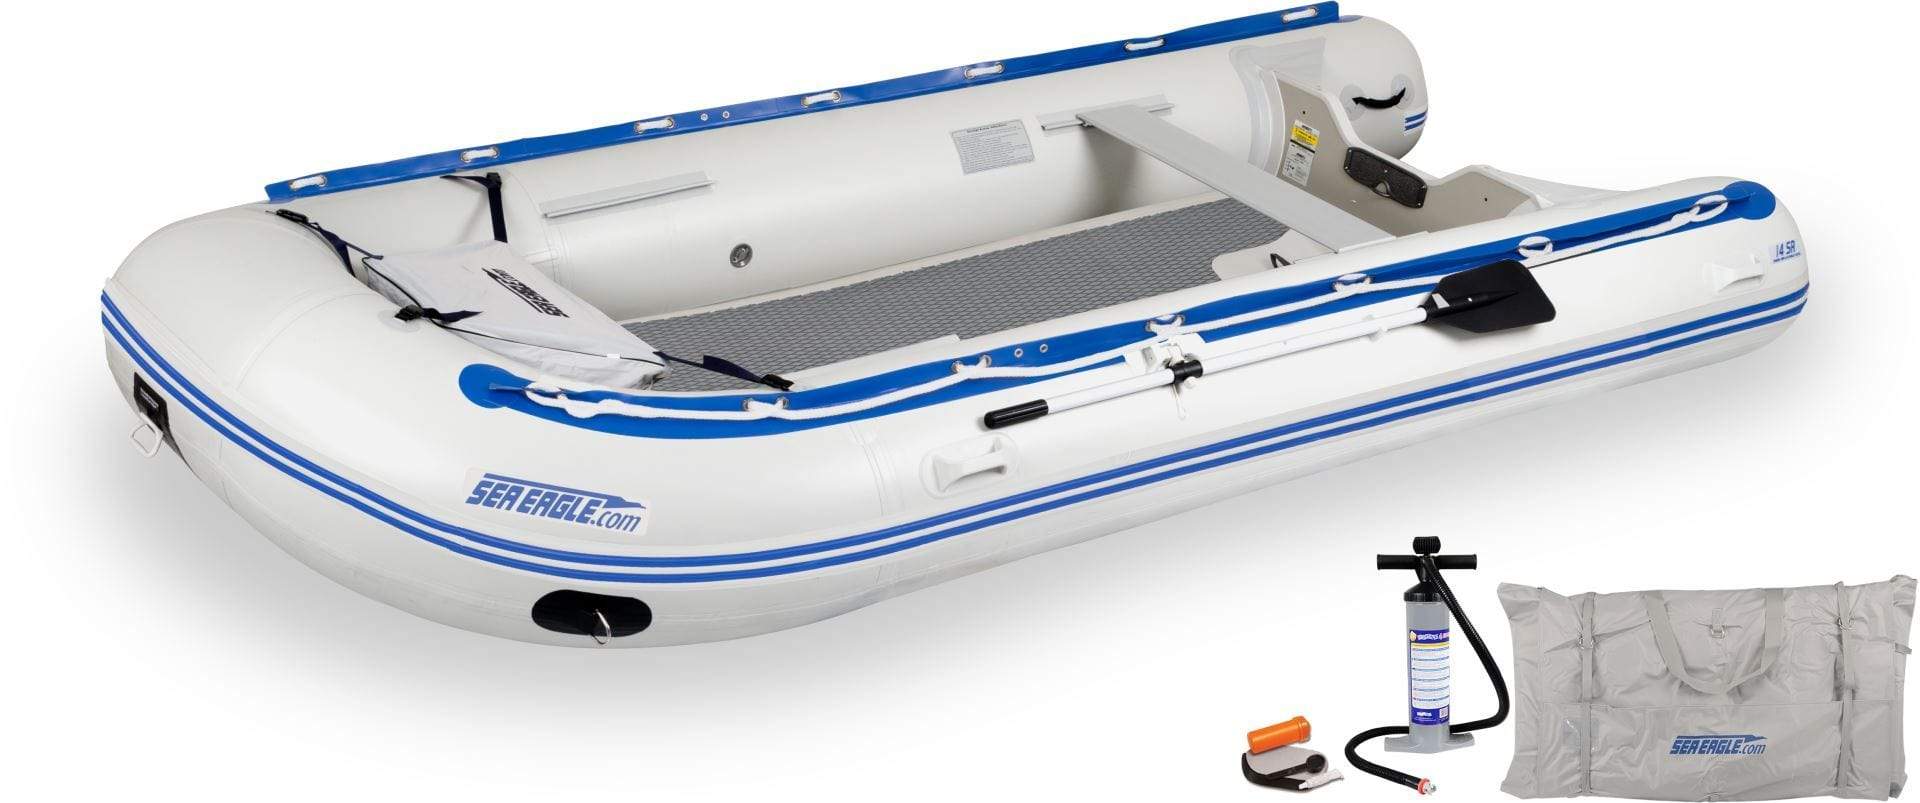 Sea Eagle 14' Sport Runabout Inflatable Boat, Drop Stitch Deluxe